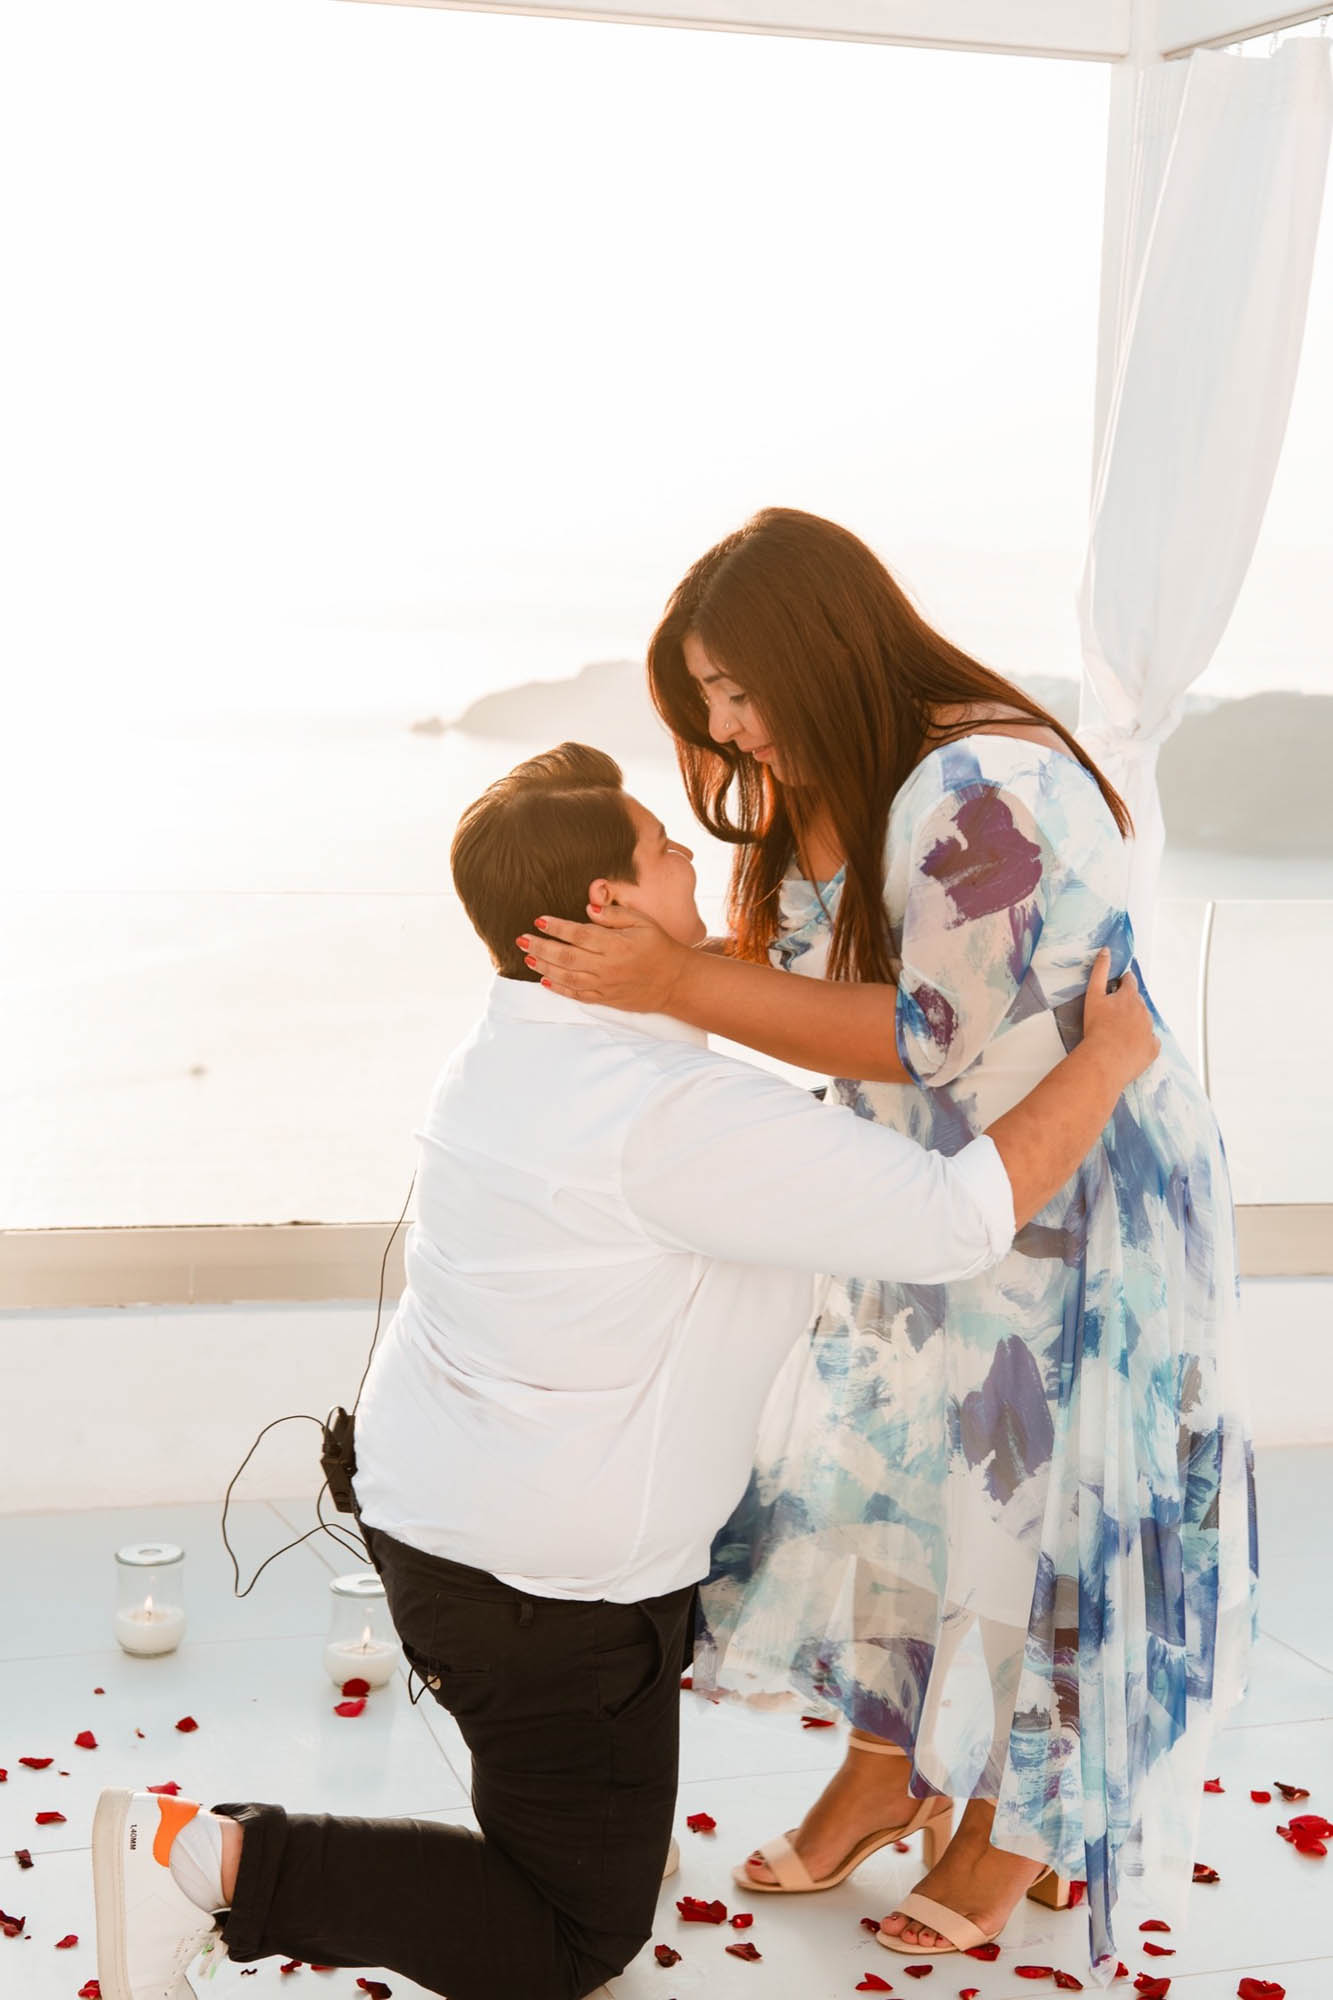 Breathtaking Santorini proposal with rose petals and a heart made of candles | Santorini Proposals | Featured on Equally Wed, the leading LGBTQ+ wedding magazine